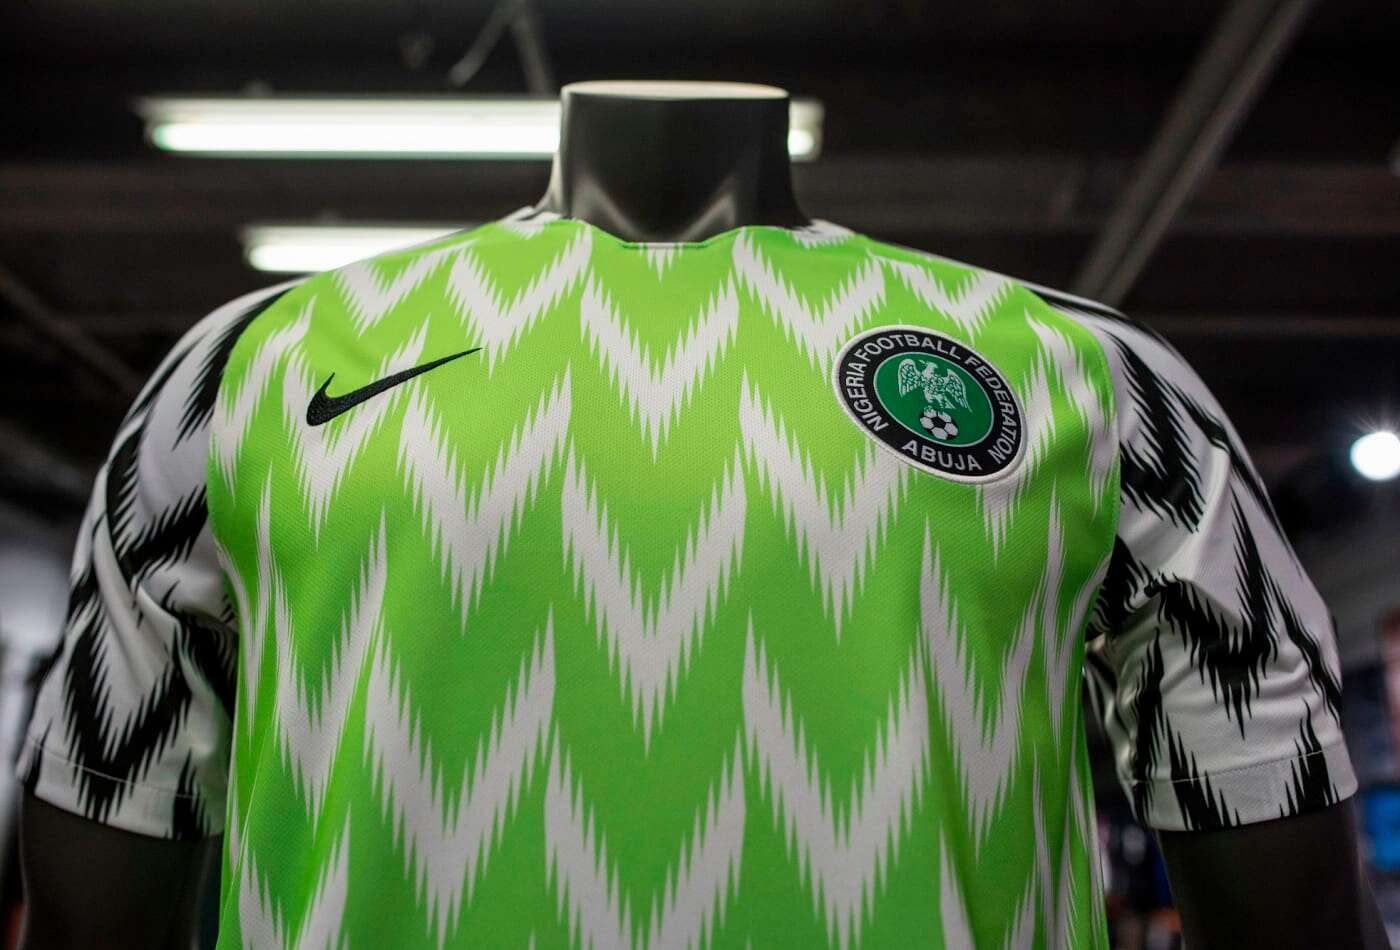 Super Eagles’ 2018 W/Cup shirt rated 5th most iconic Jersey